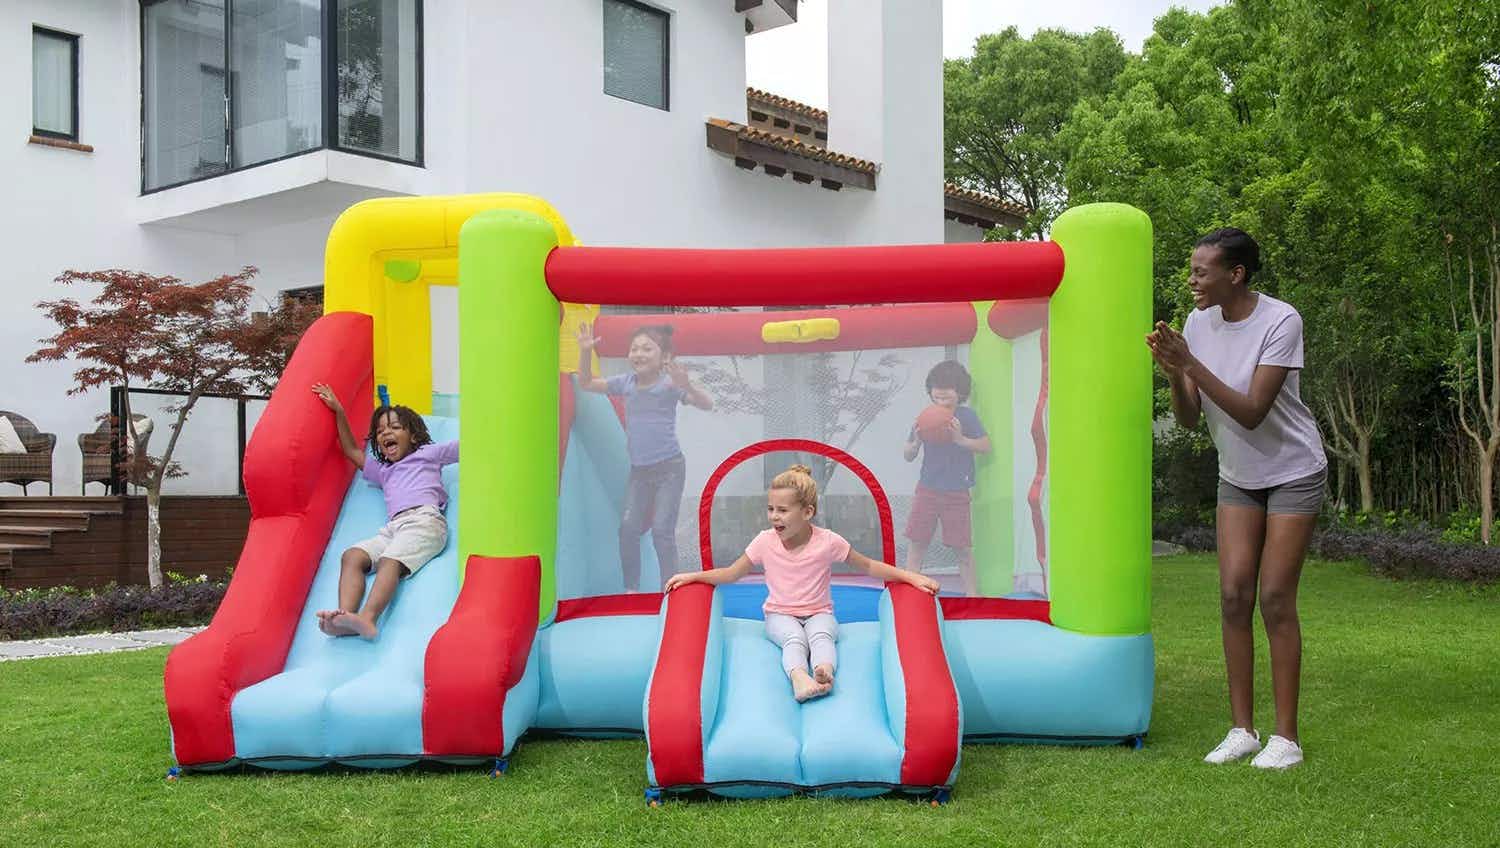 bounce house set up with kids playing in it